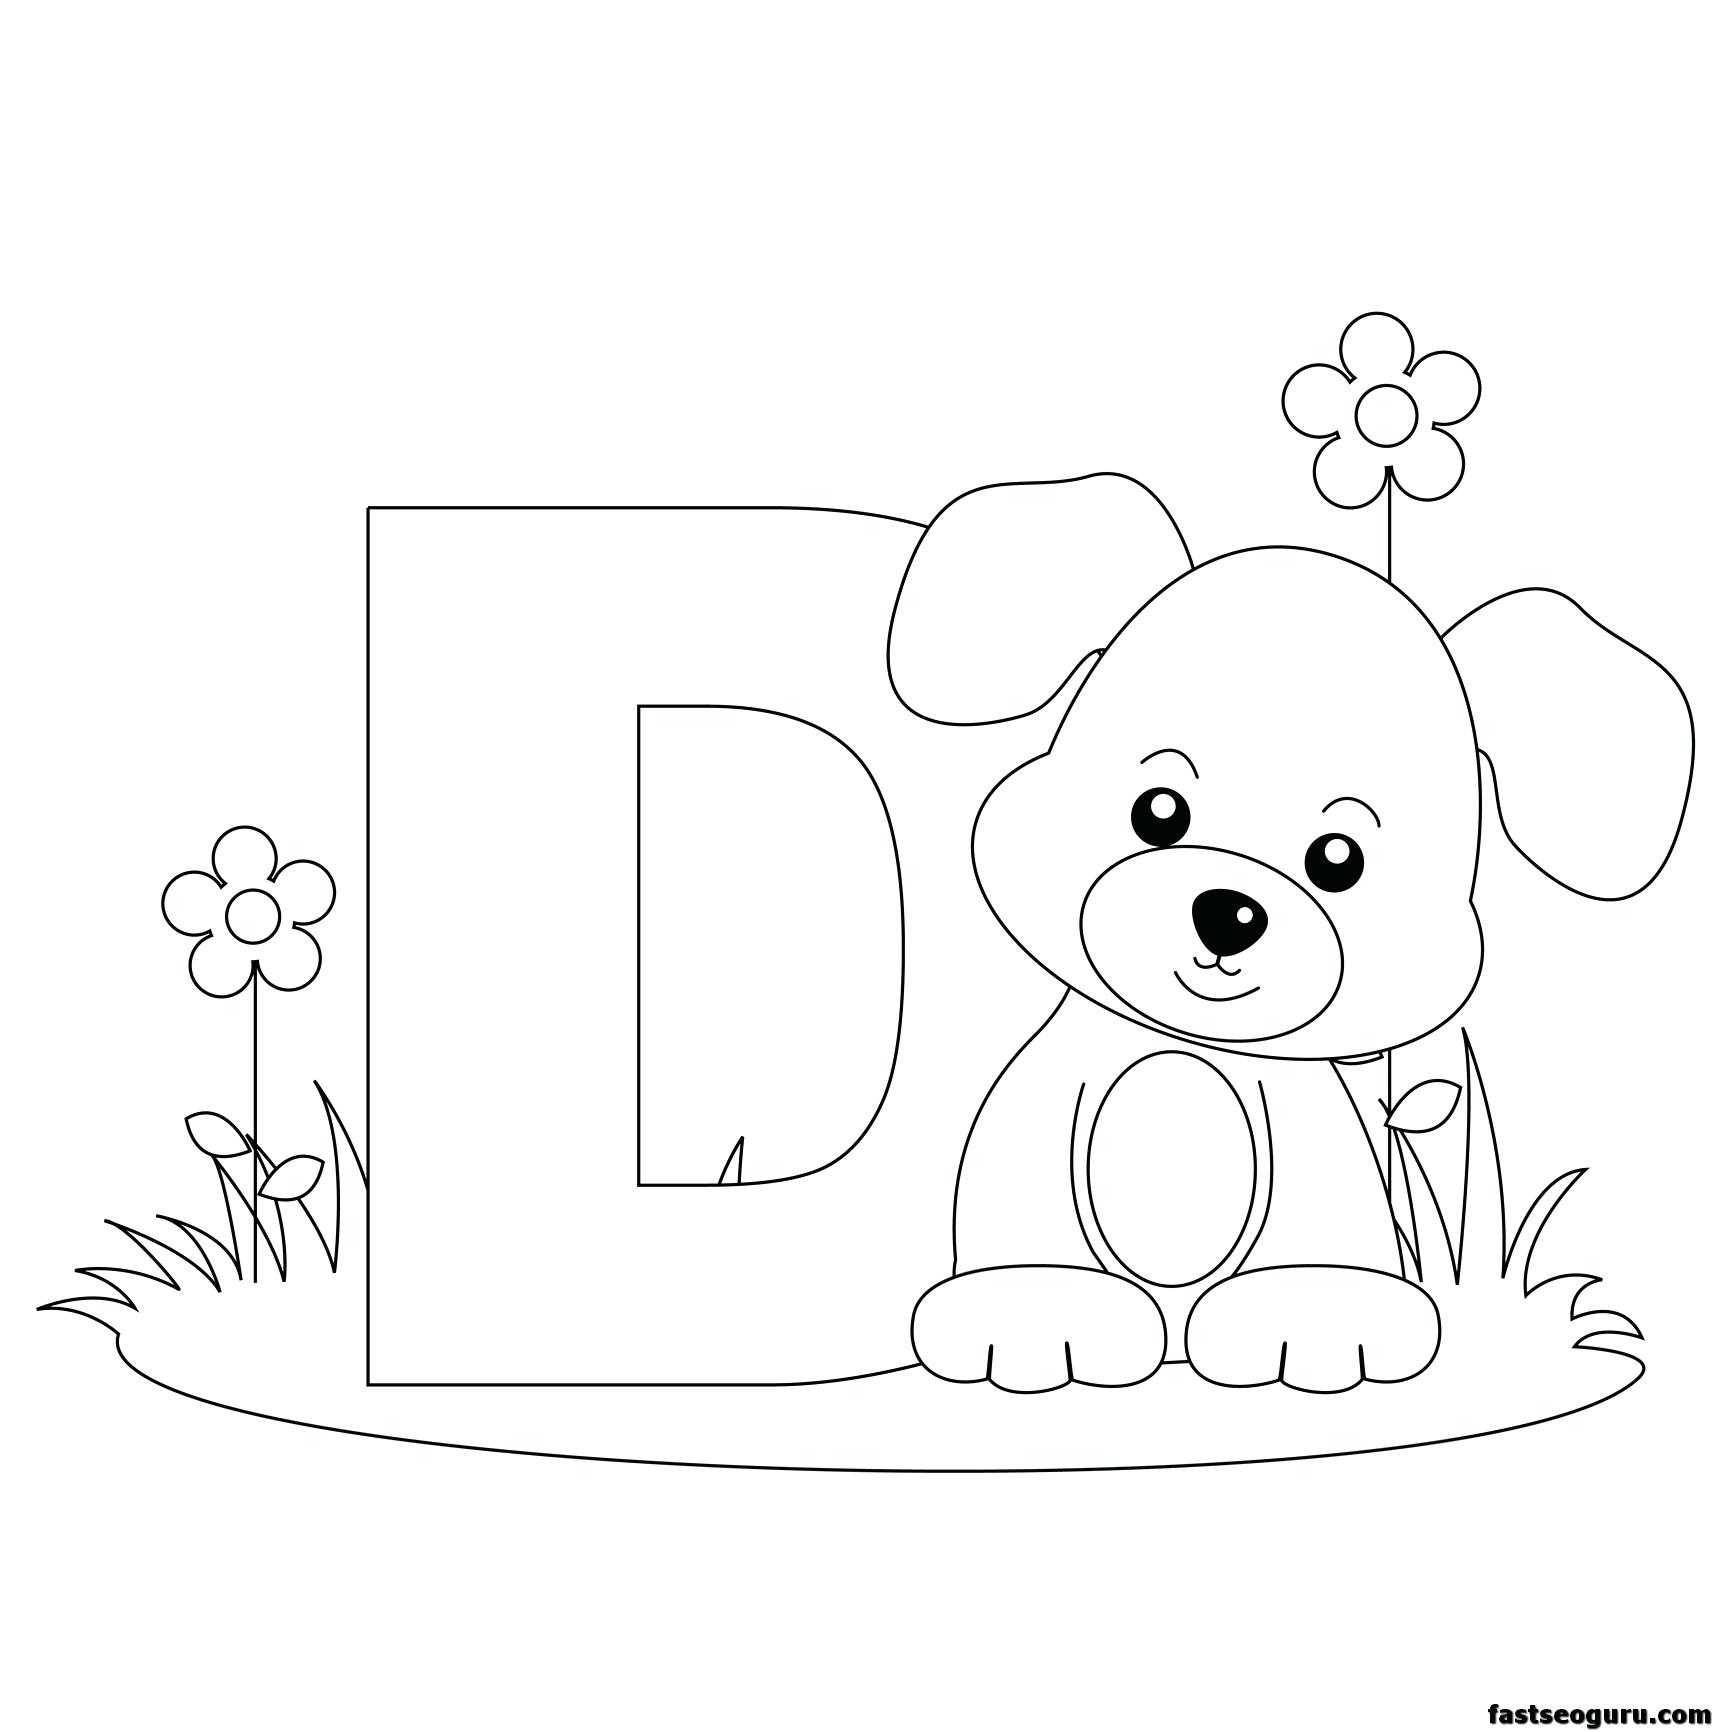 Get The Free Printable Alphabet Coloring Pages For Kids Of Animals - Free Printable Preschool Alphabet Coloring Pages